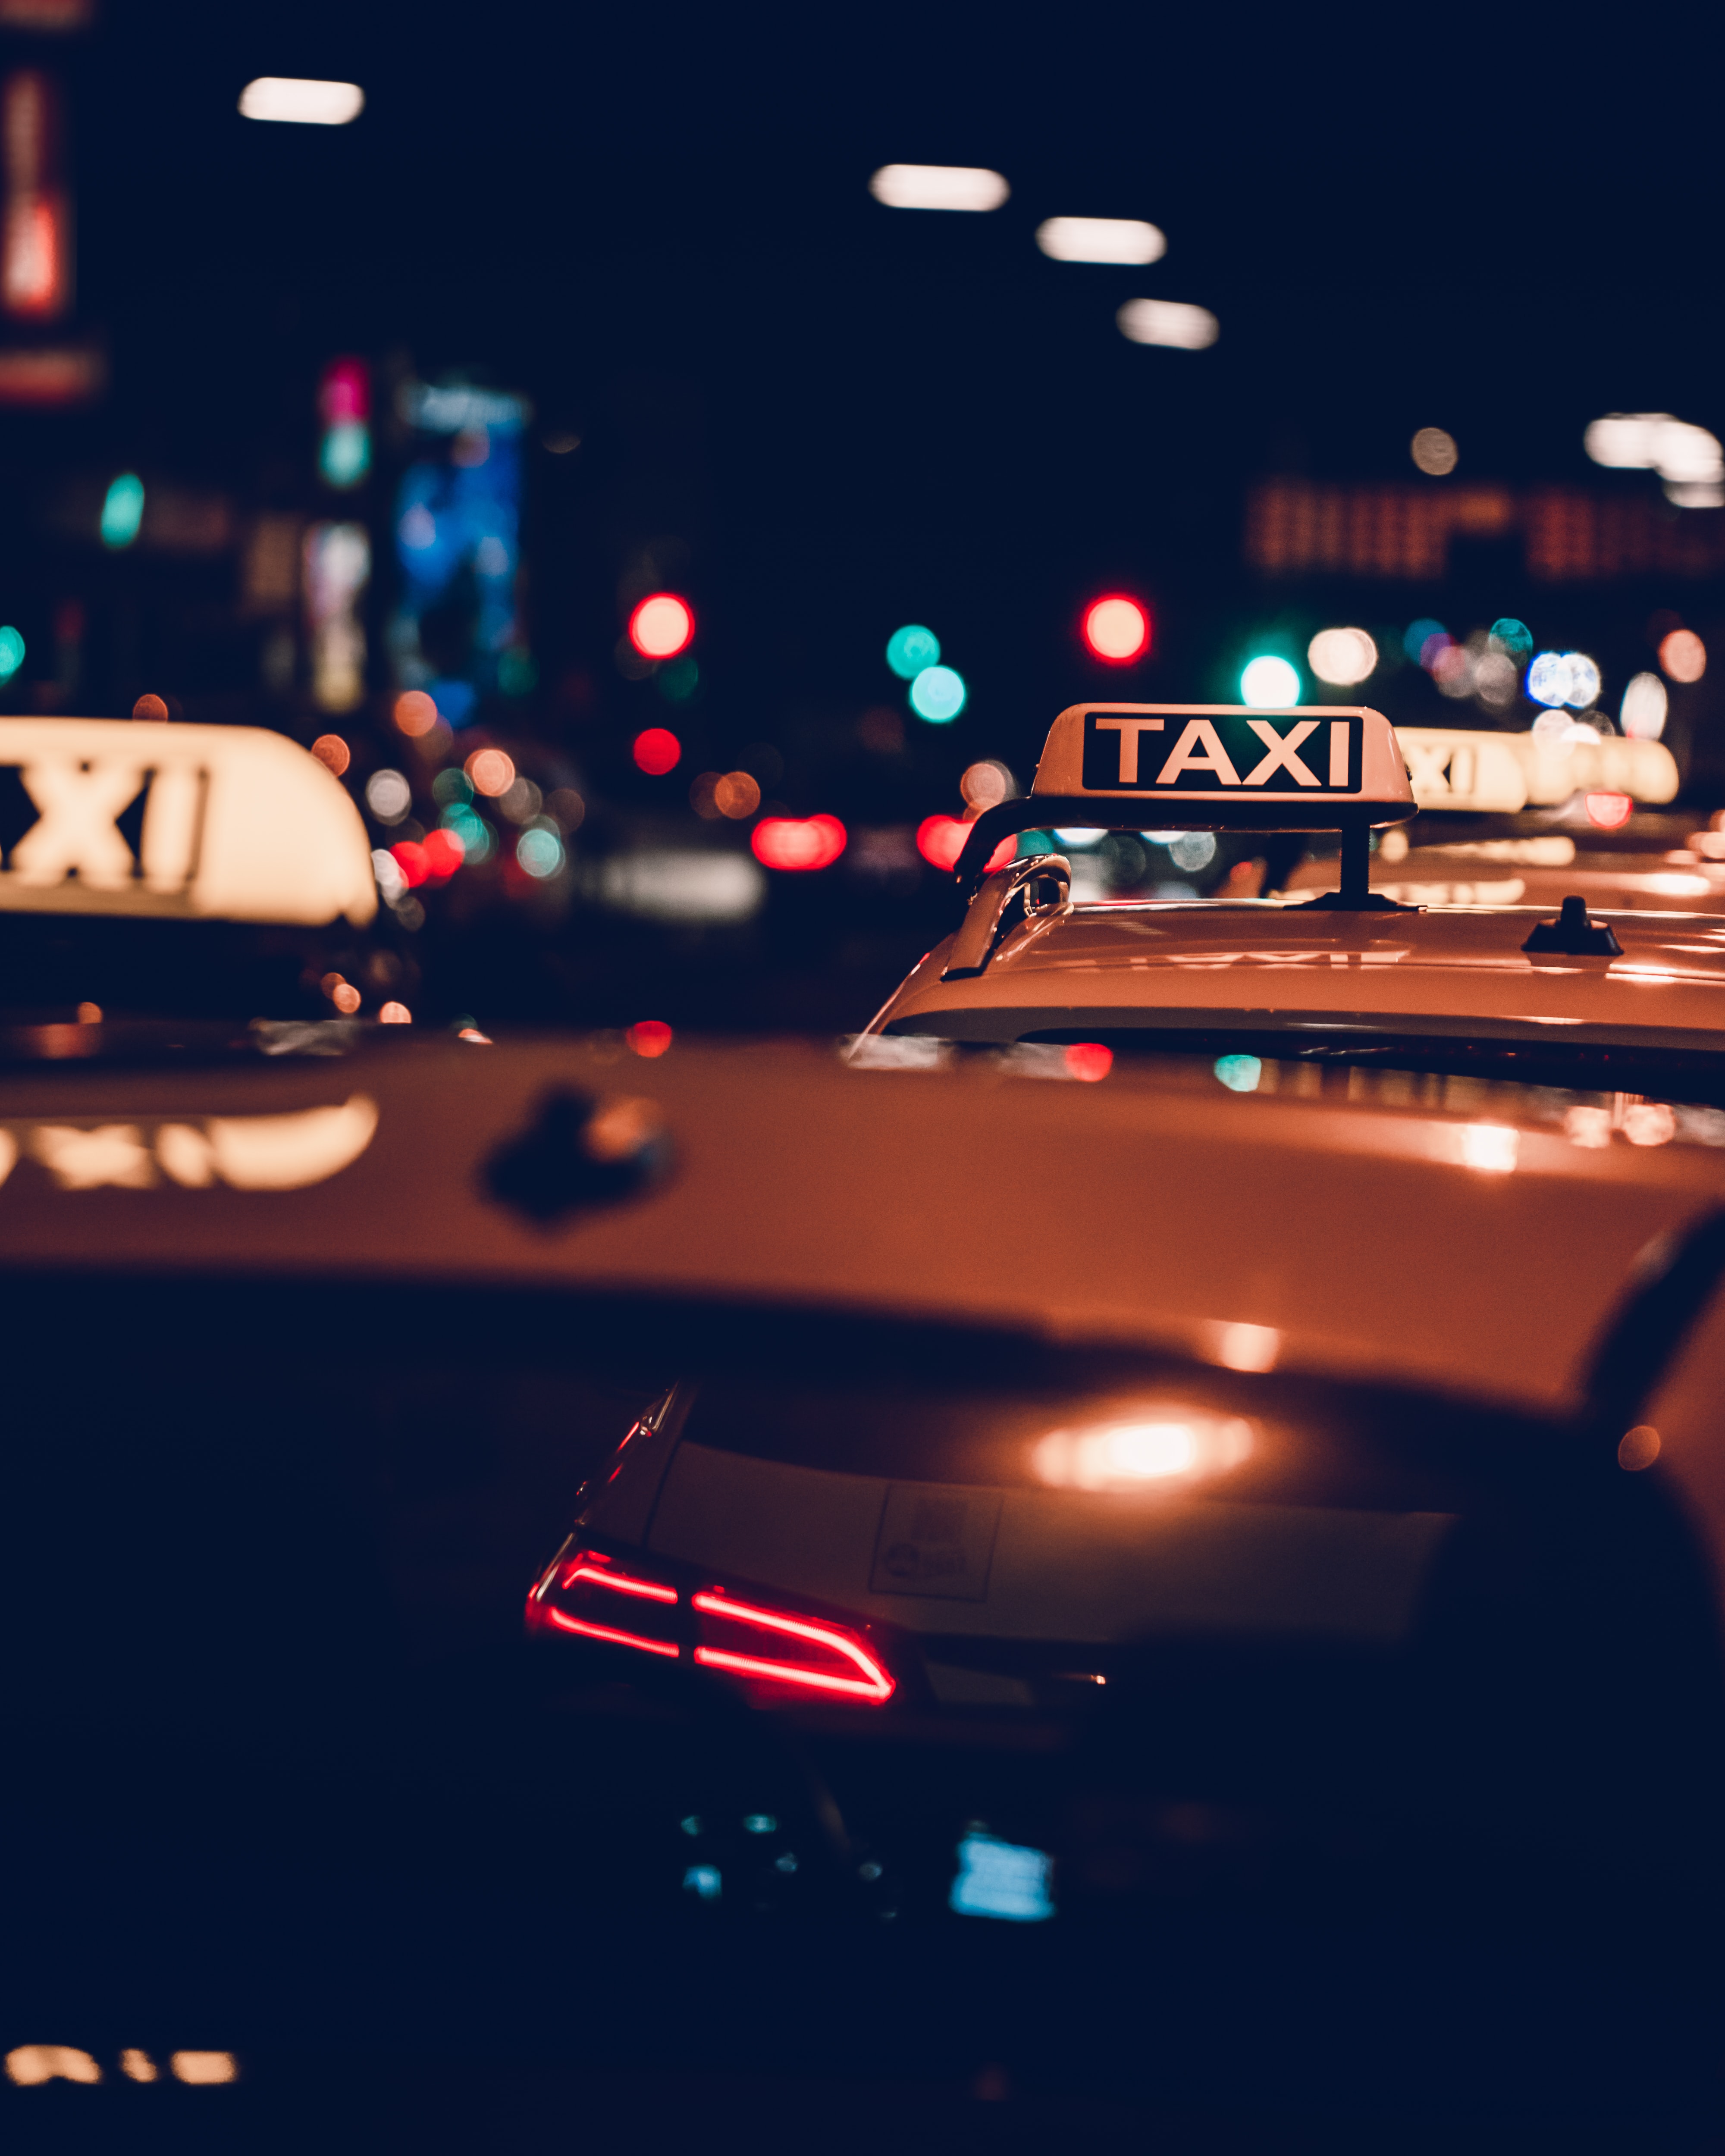 Best Mobile Taxi Backgrounds